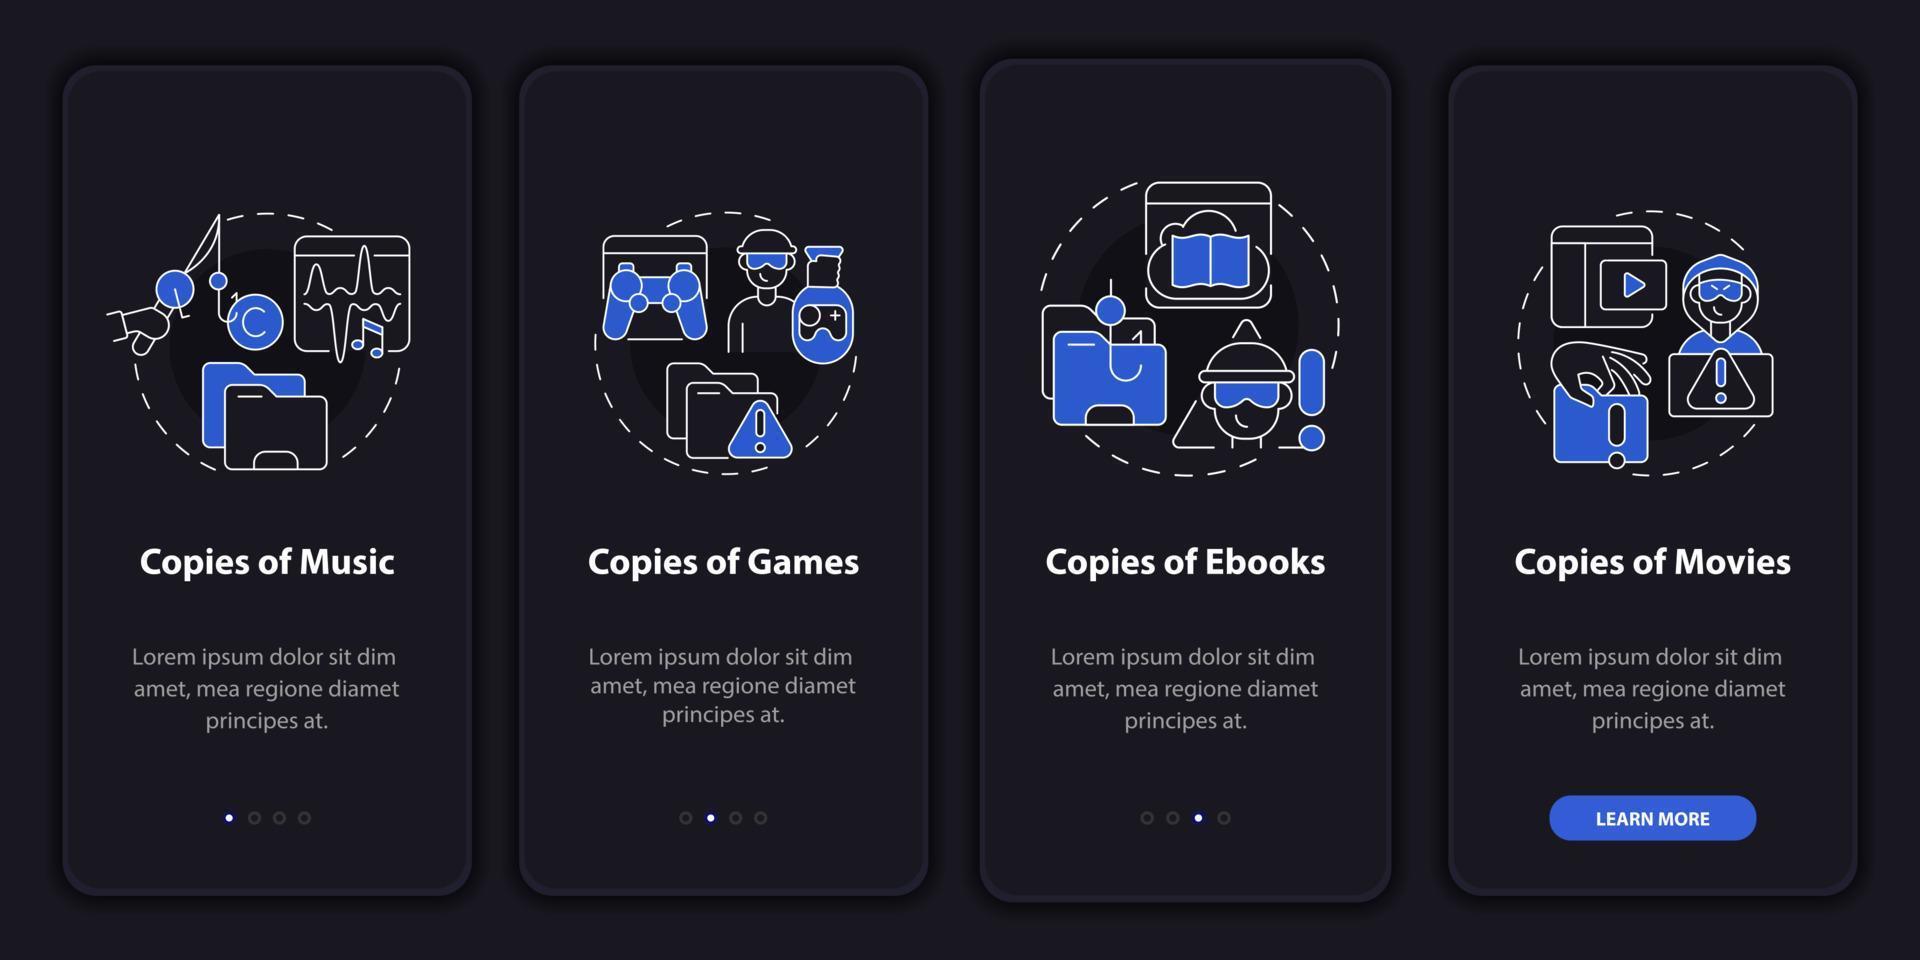 Copyright infringement onboarding mobile app page screen. Copies of video games walkthrough 4 steps graphic instructions with concepts. UI, UX, GUI vector template with linear night mode illustrations